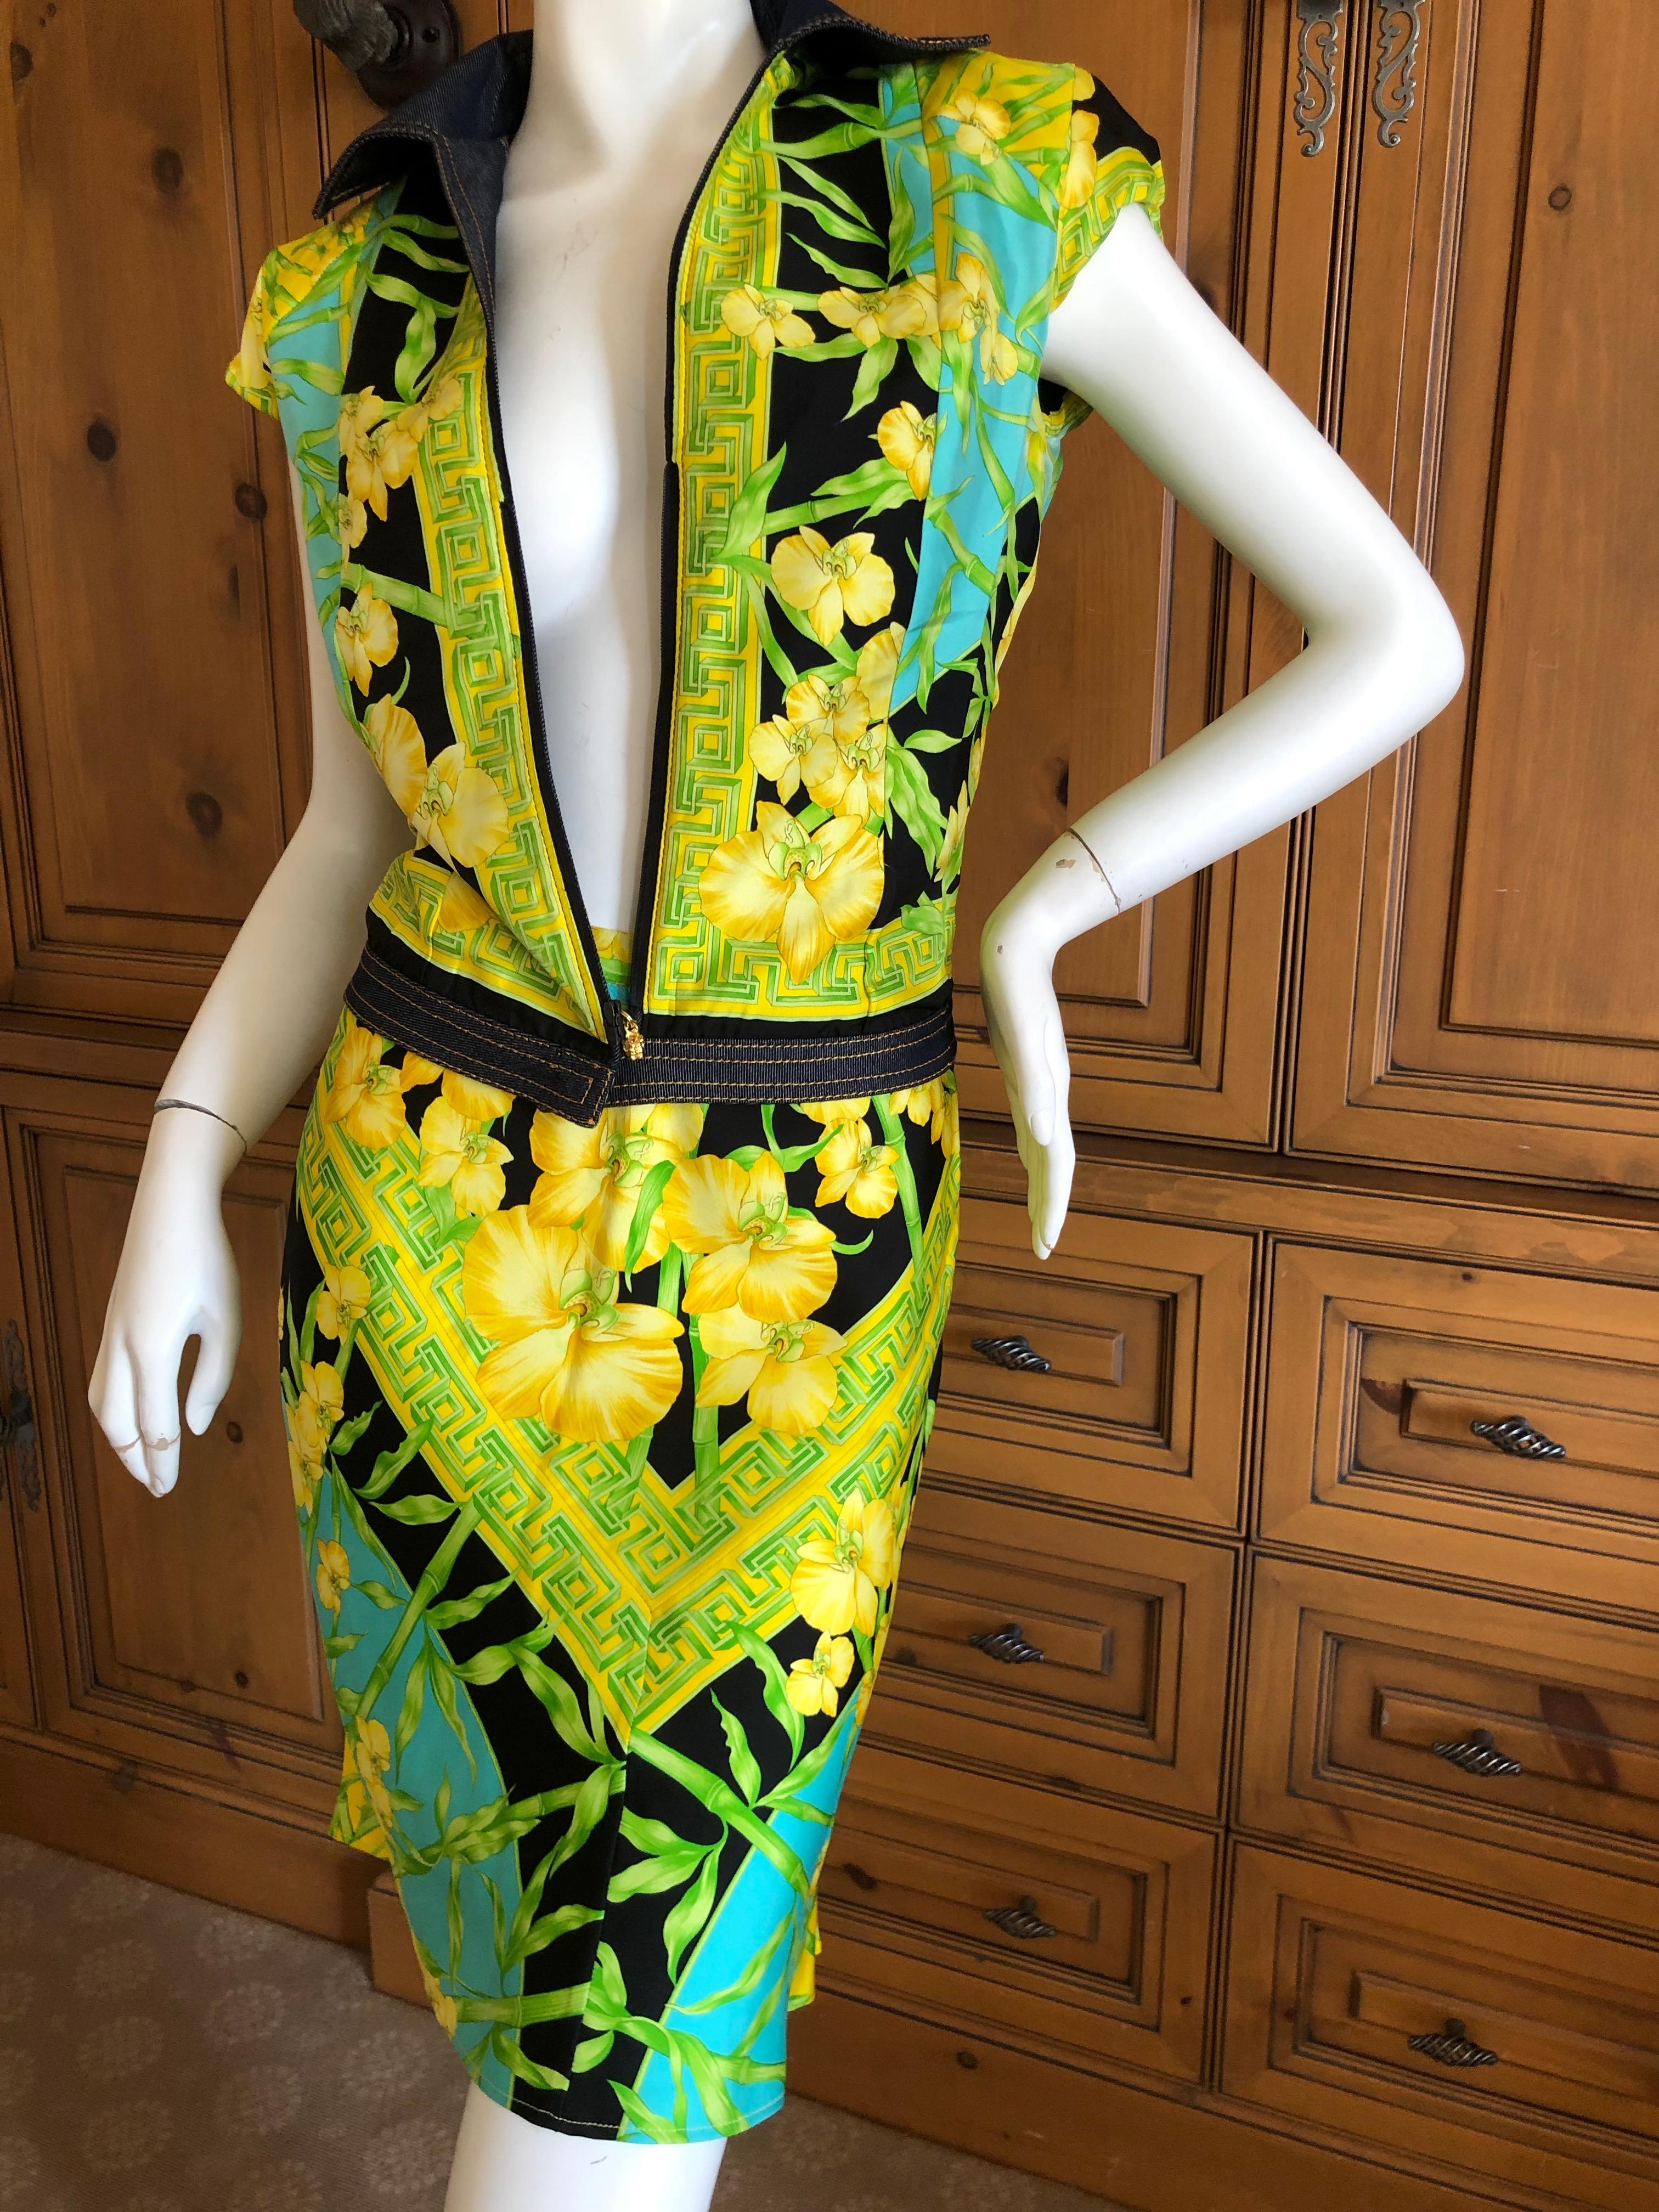 Gianni Versace Couture Late 1980's Tropical Color Greek Key Pattern Silk Skirt Suit .
The top is denim with silk lining, I show the silk lining reversed.
Looks wonderful each way, denim or silk showing.
  Size 38
  Bust 36